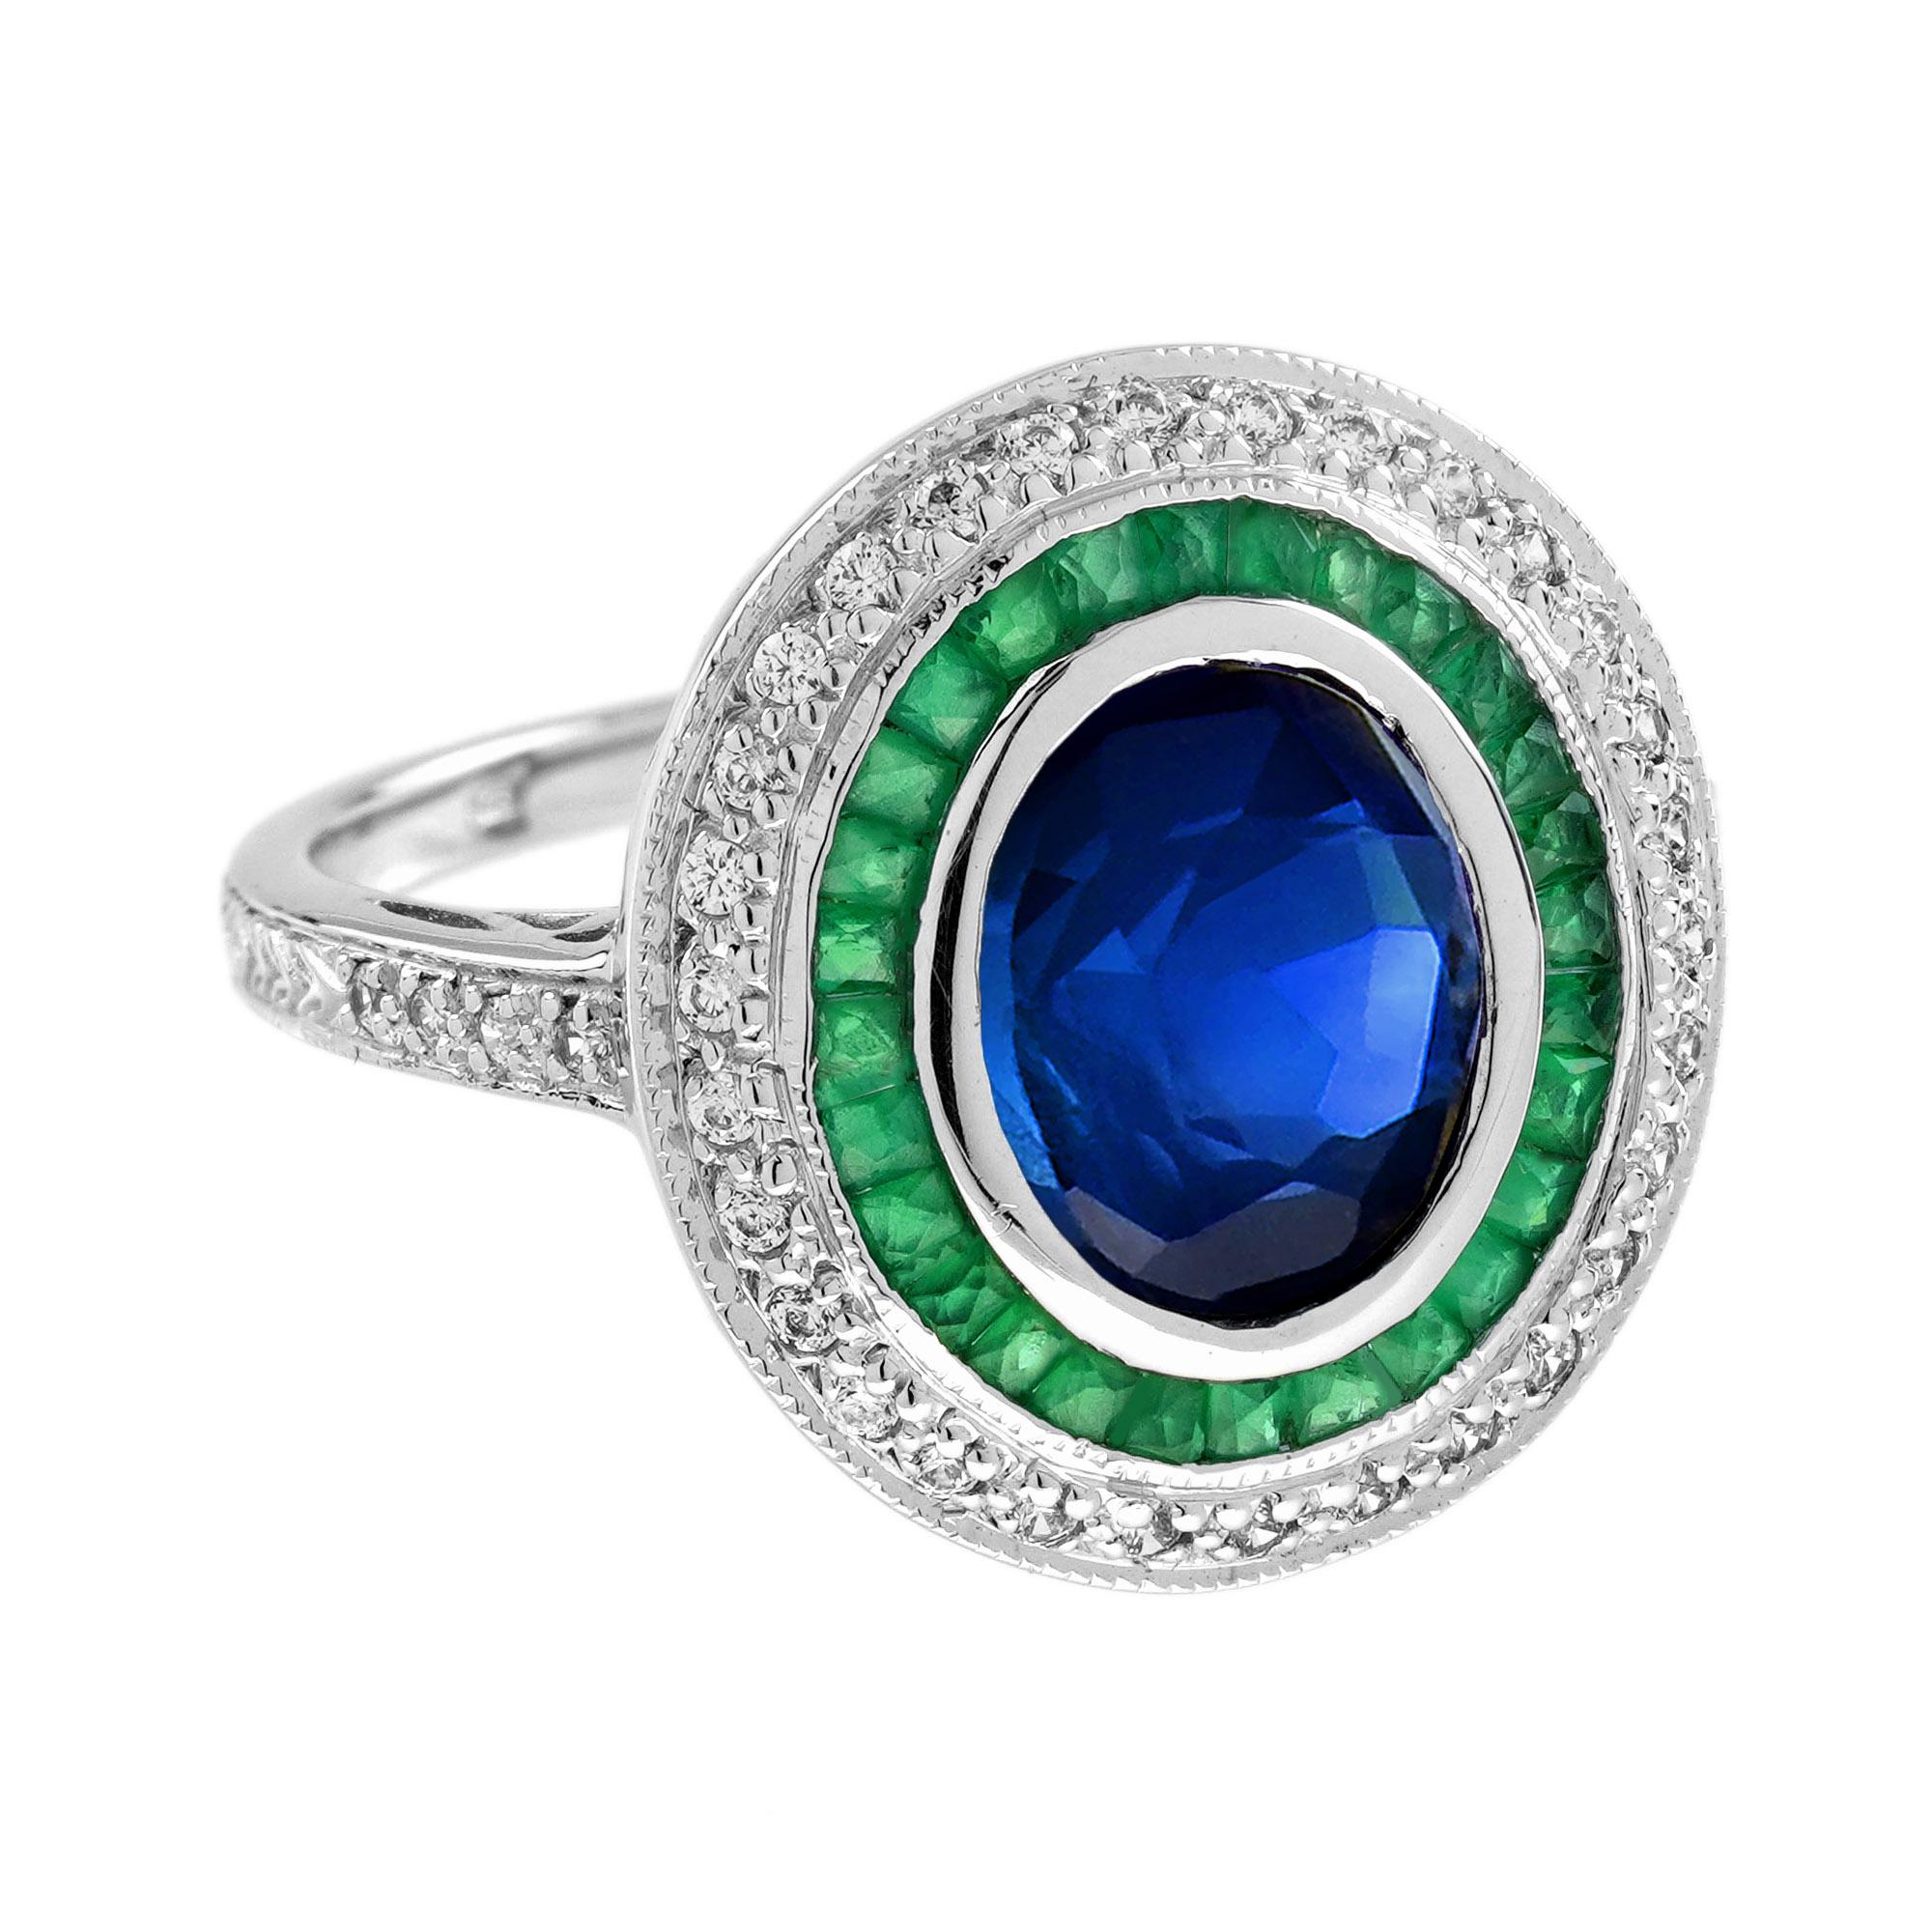 Oval Cut Blue Sapphire Emerald Diamond Art Deco Style Engagement Ring in 18K White Gold For Sale